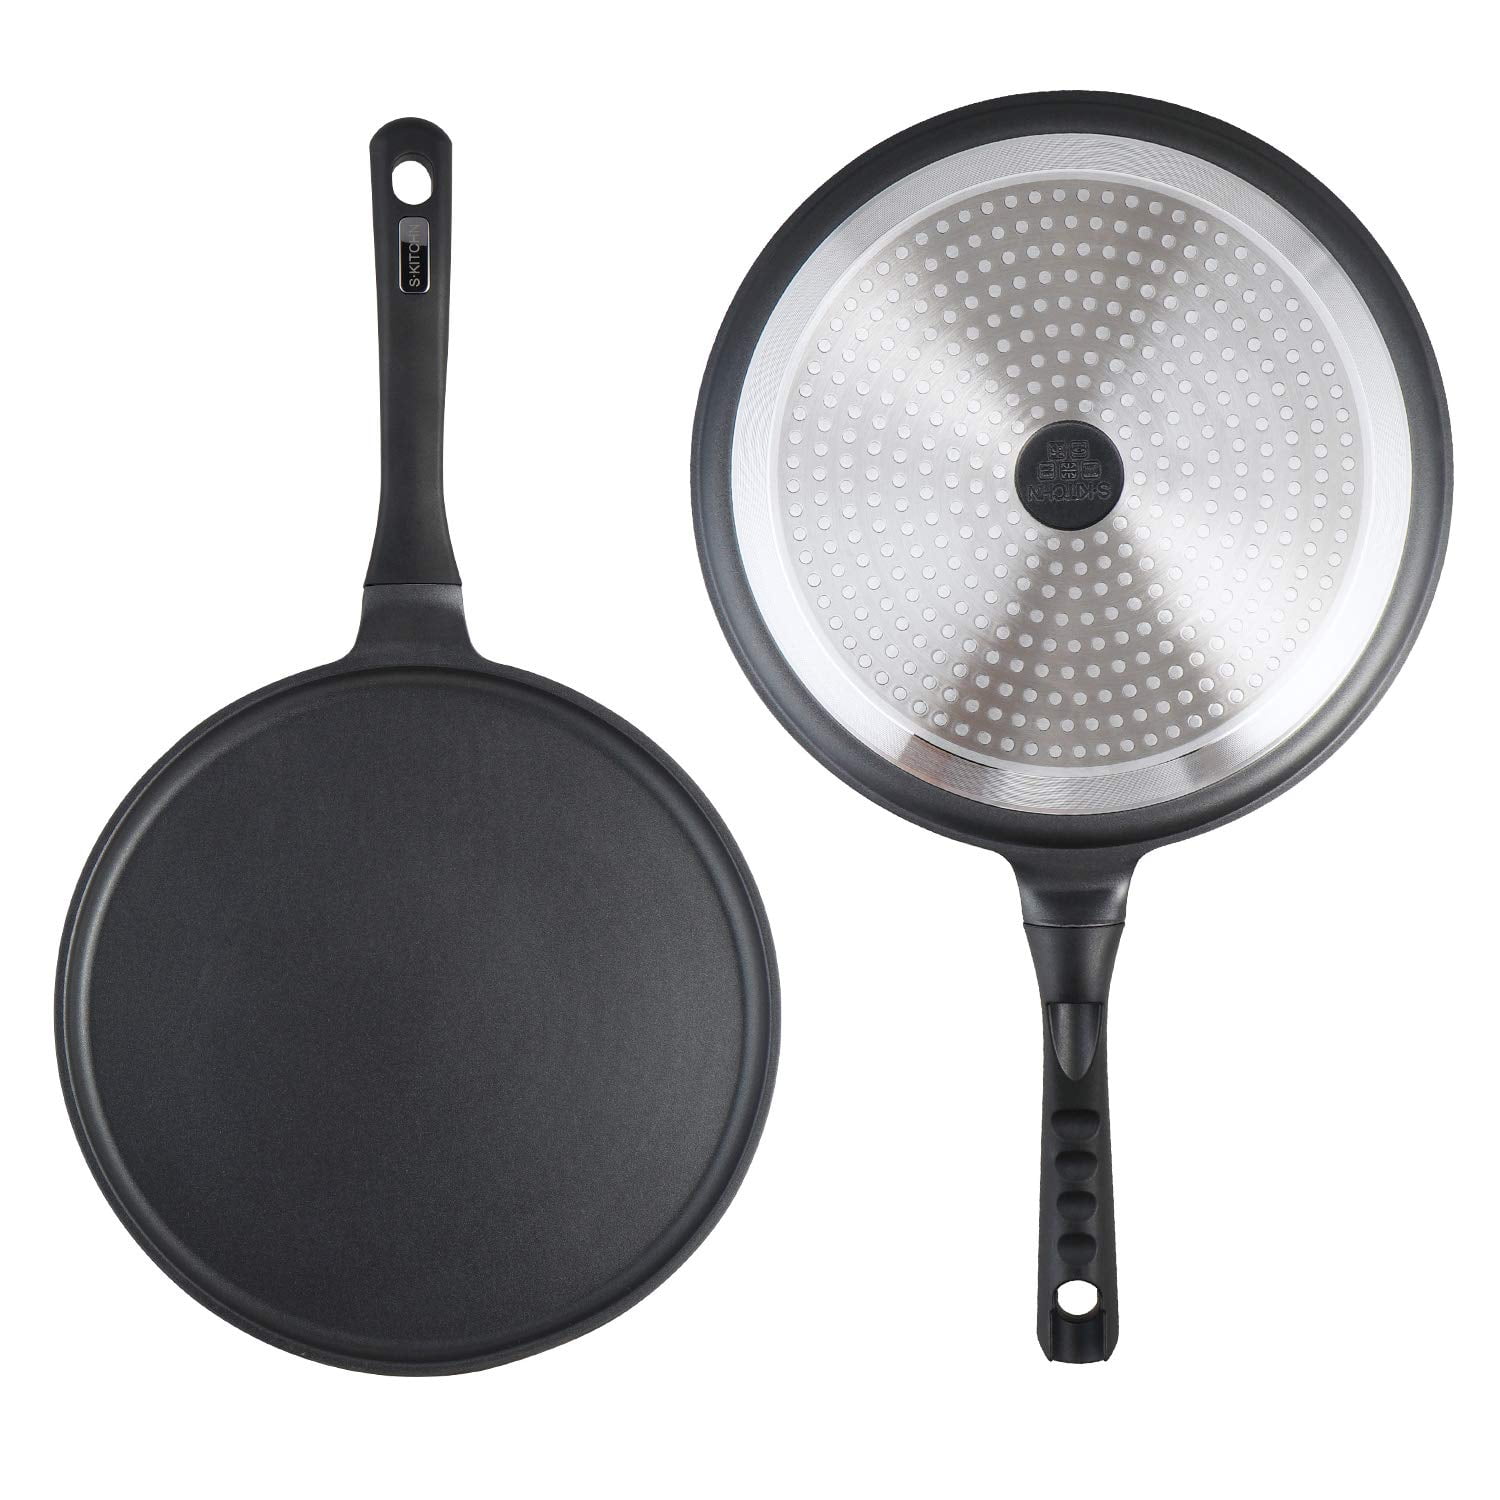 DIIG Non Stick Crepe Pan 11 Inch with Spreader Spatula, No Stick Pancake  Pan for Cooking, Brown Griddle for Frying Egg, Steak, Crepe Cake, Omelette